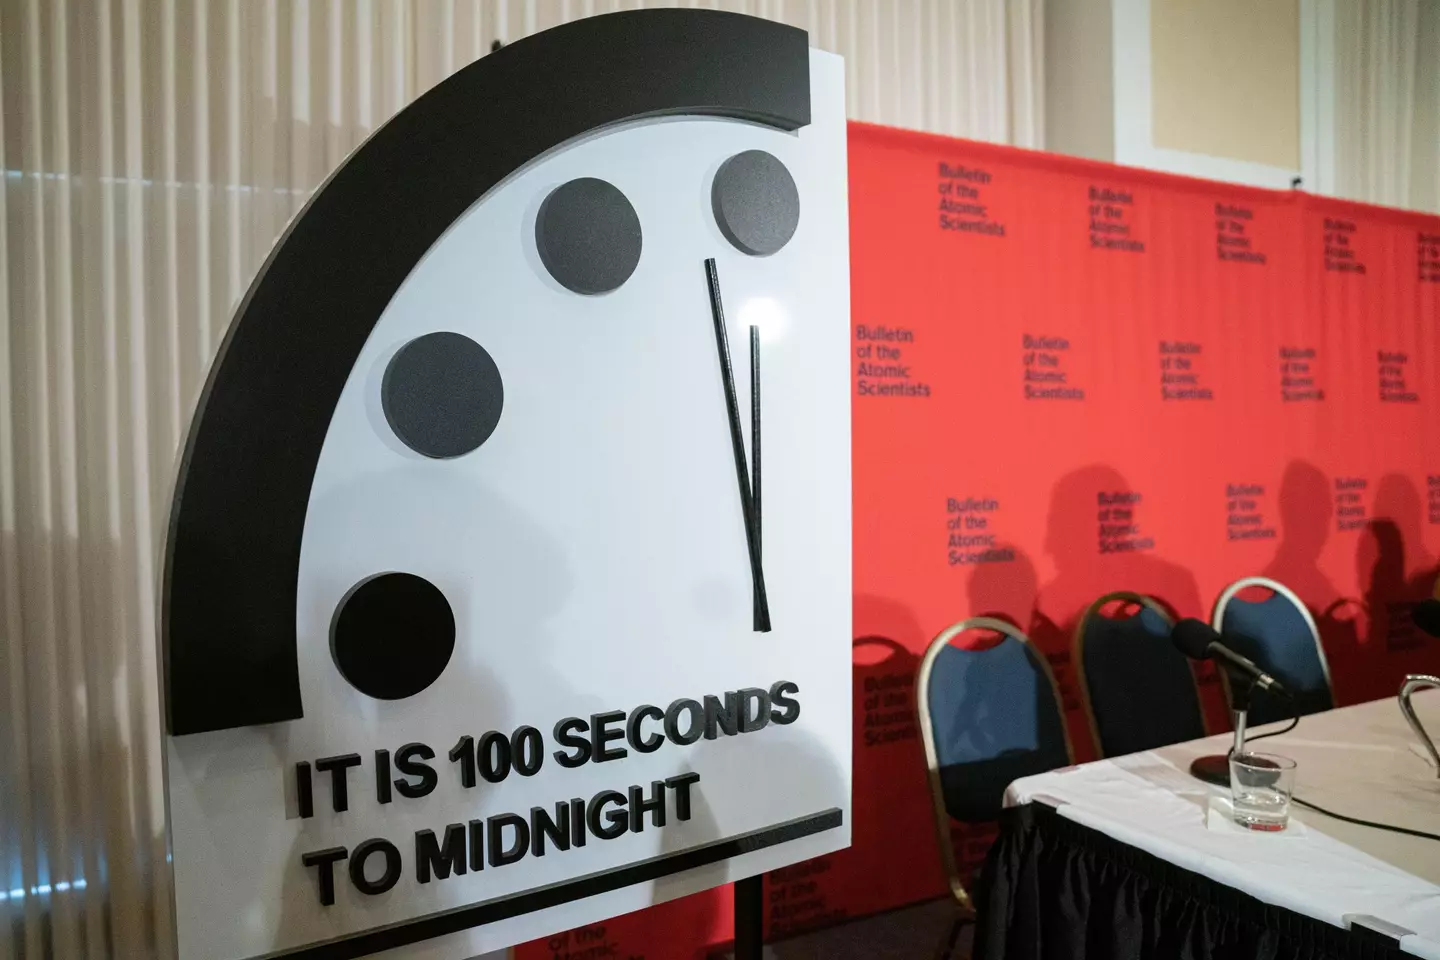 In 2020, the Doomsday Clock was moved to 100 seconds to midnight.